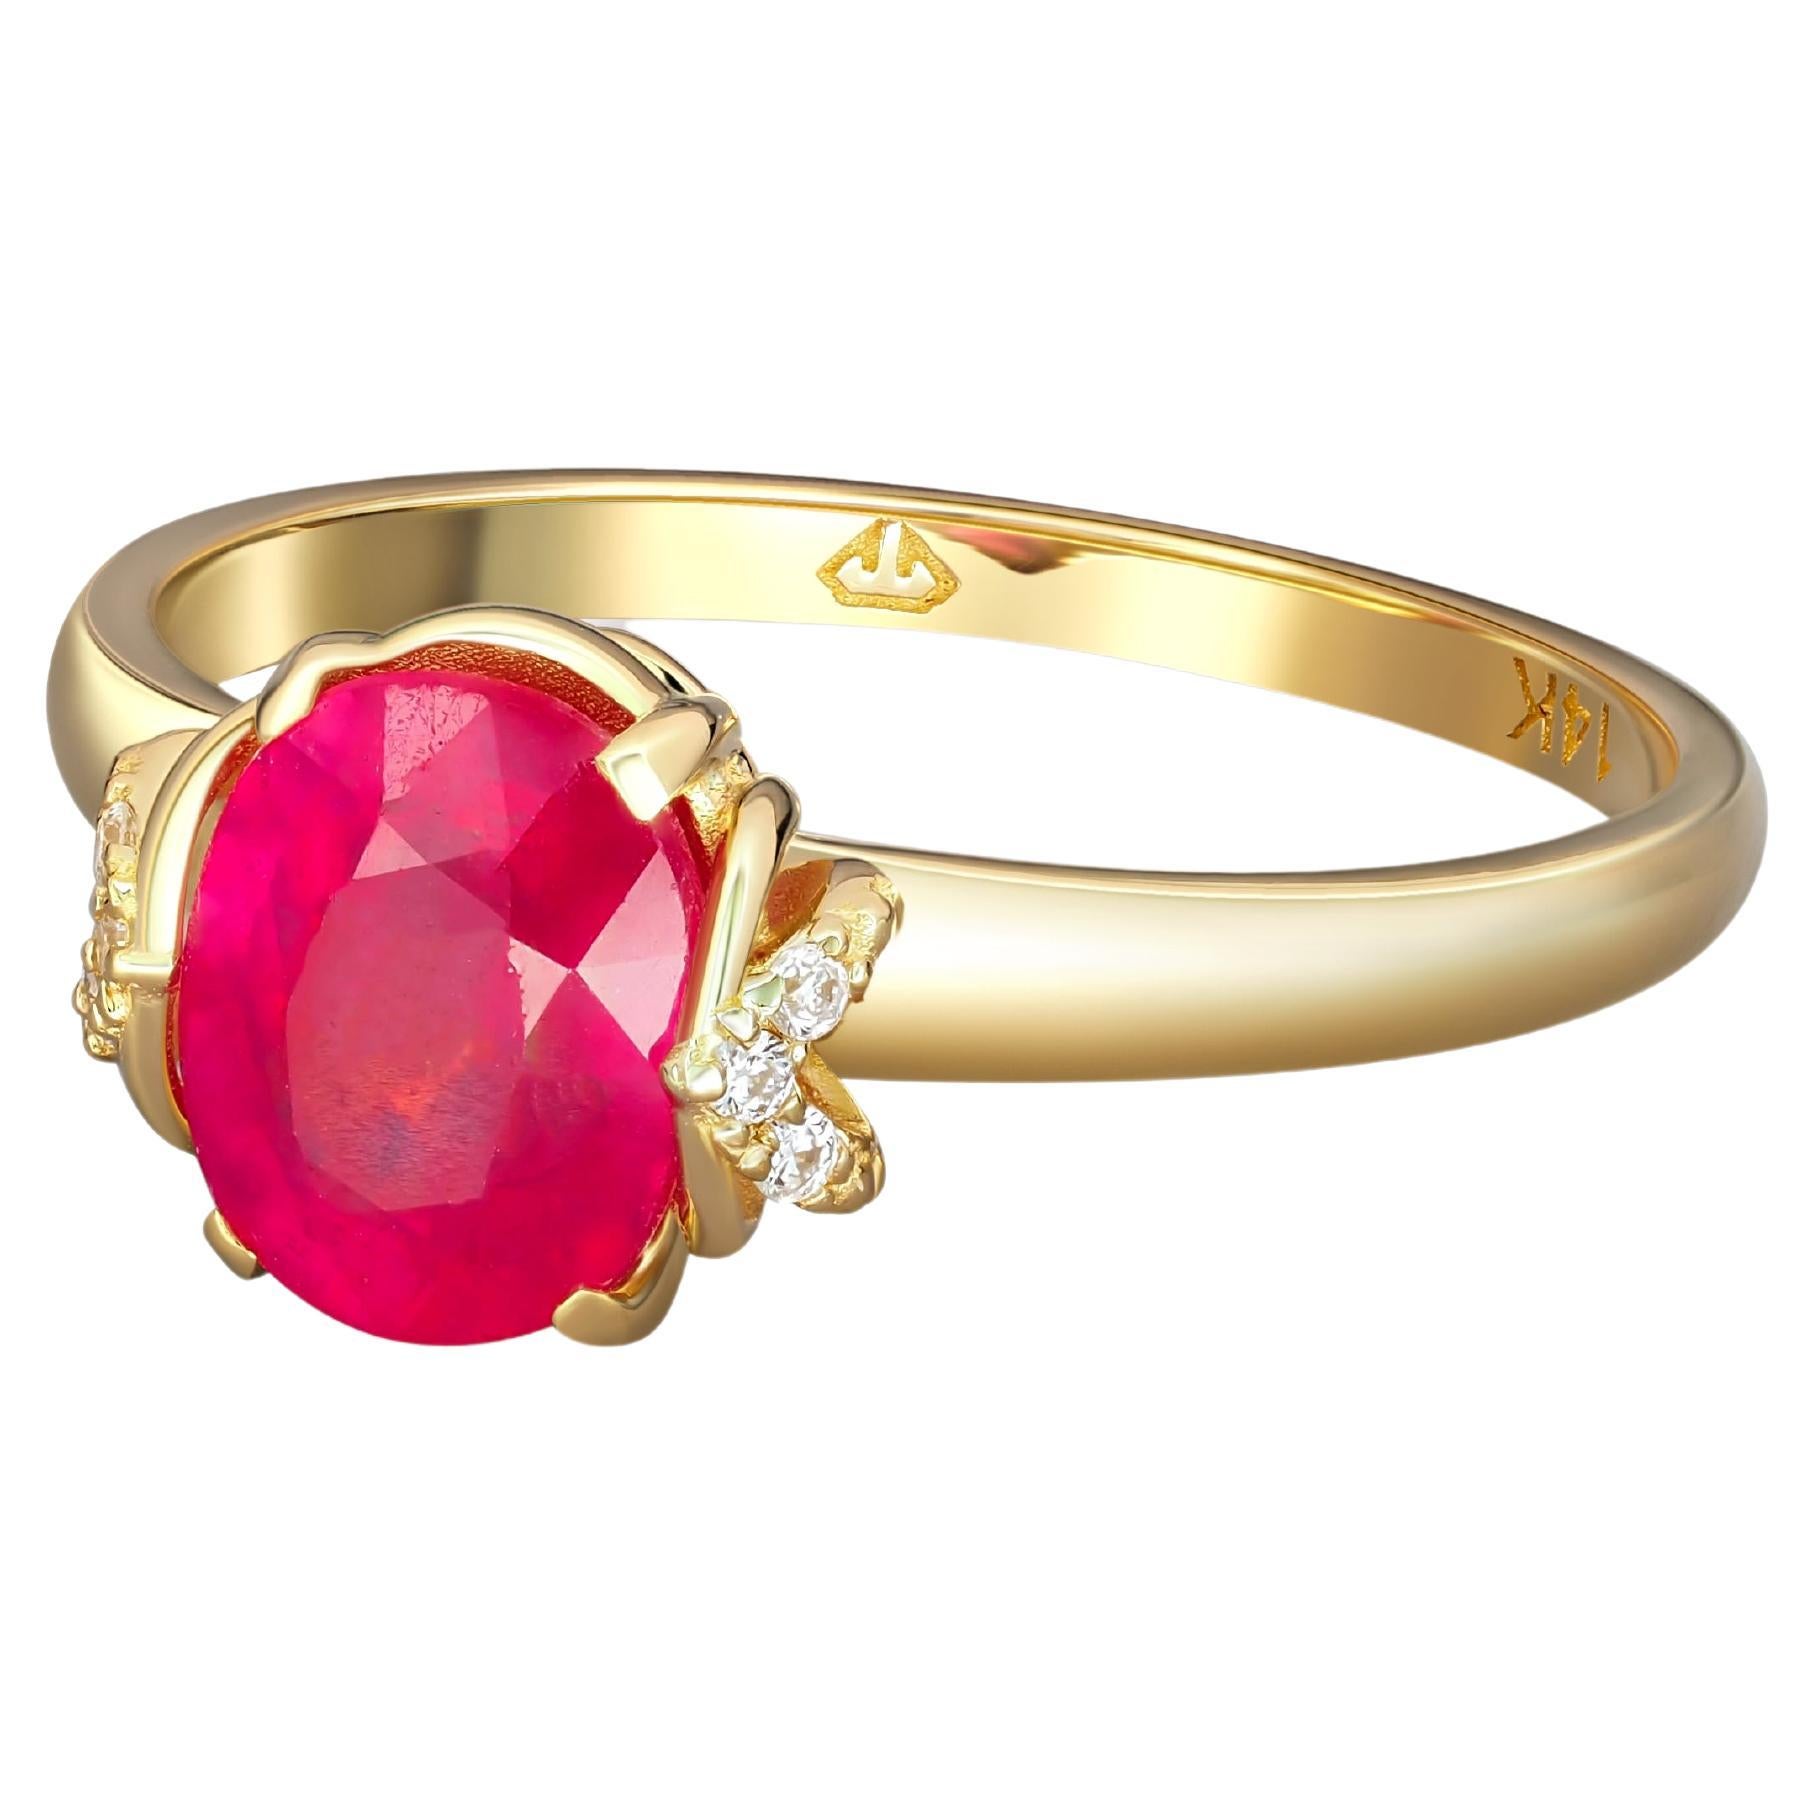 For Sale:  14 Karat Gold Ring with Ruby and Diamonds. Oval ruby ring!